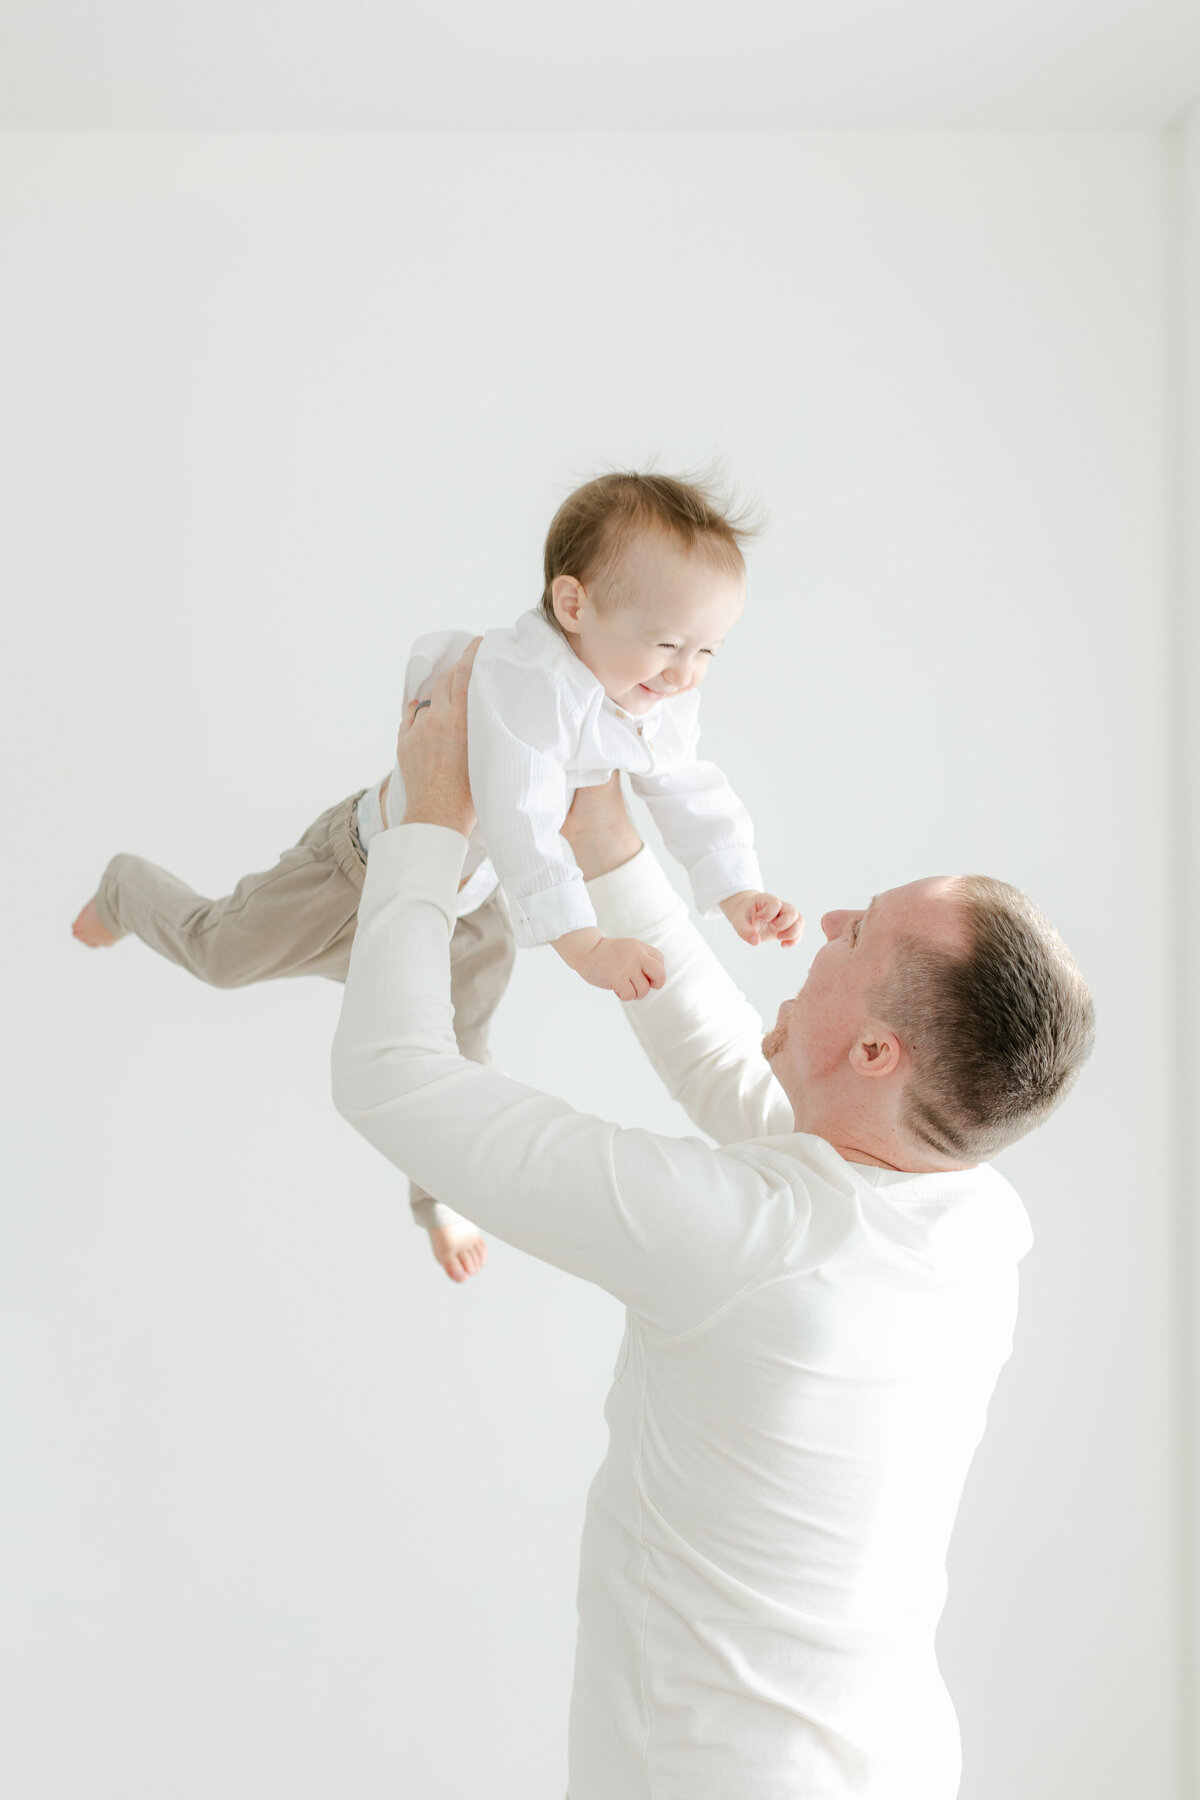 Dad tossing his toddler in the air laughing and playing in Philadelphia Portrait Photographer Tara Federico's haddonfield NJ studio